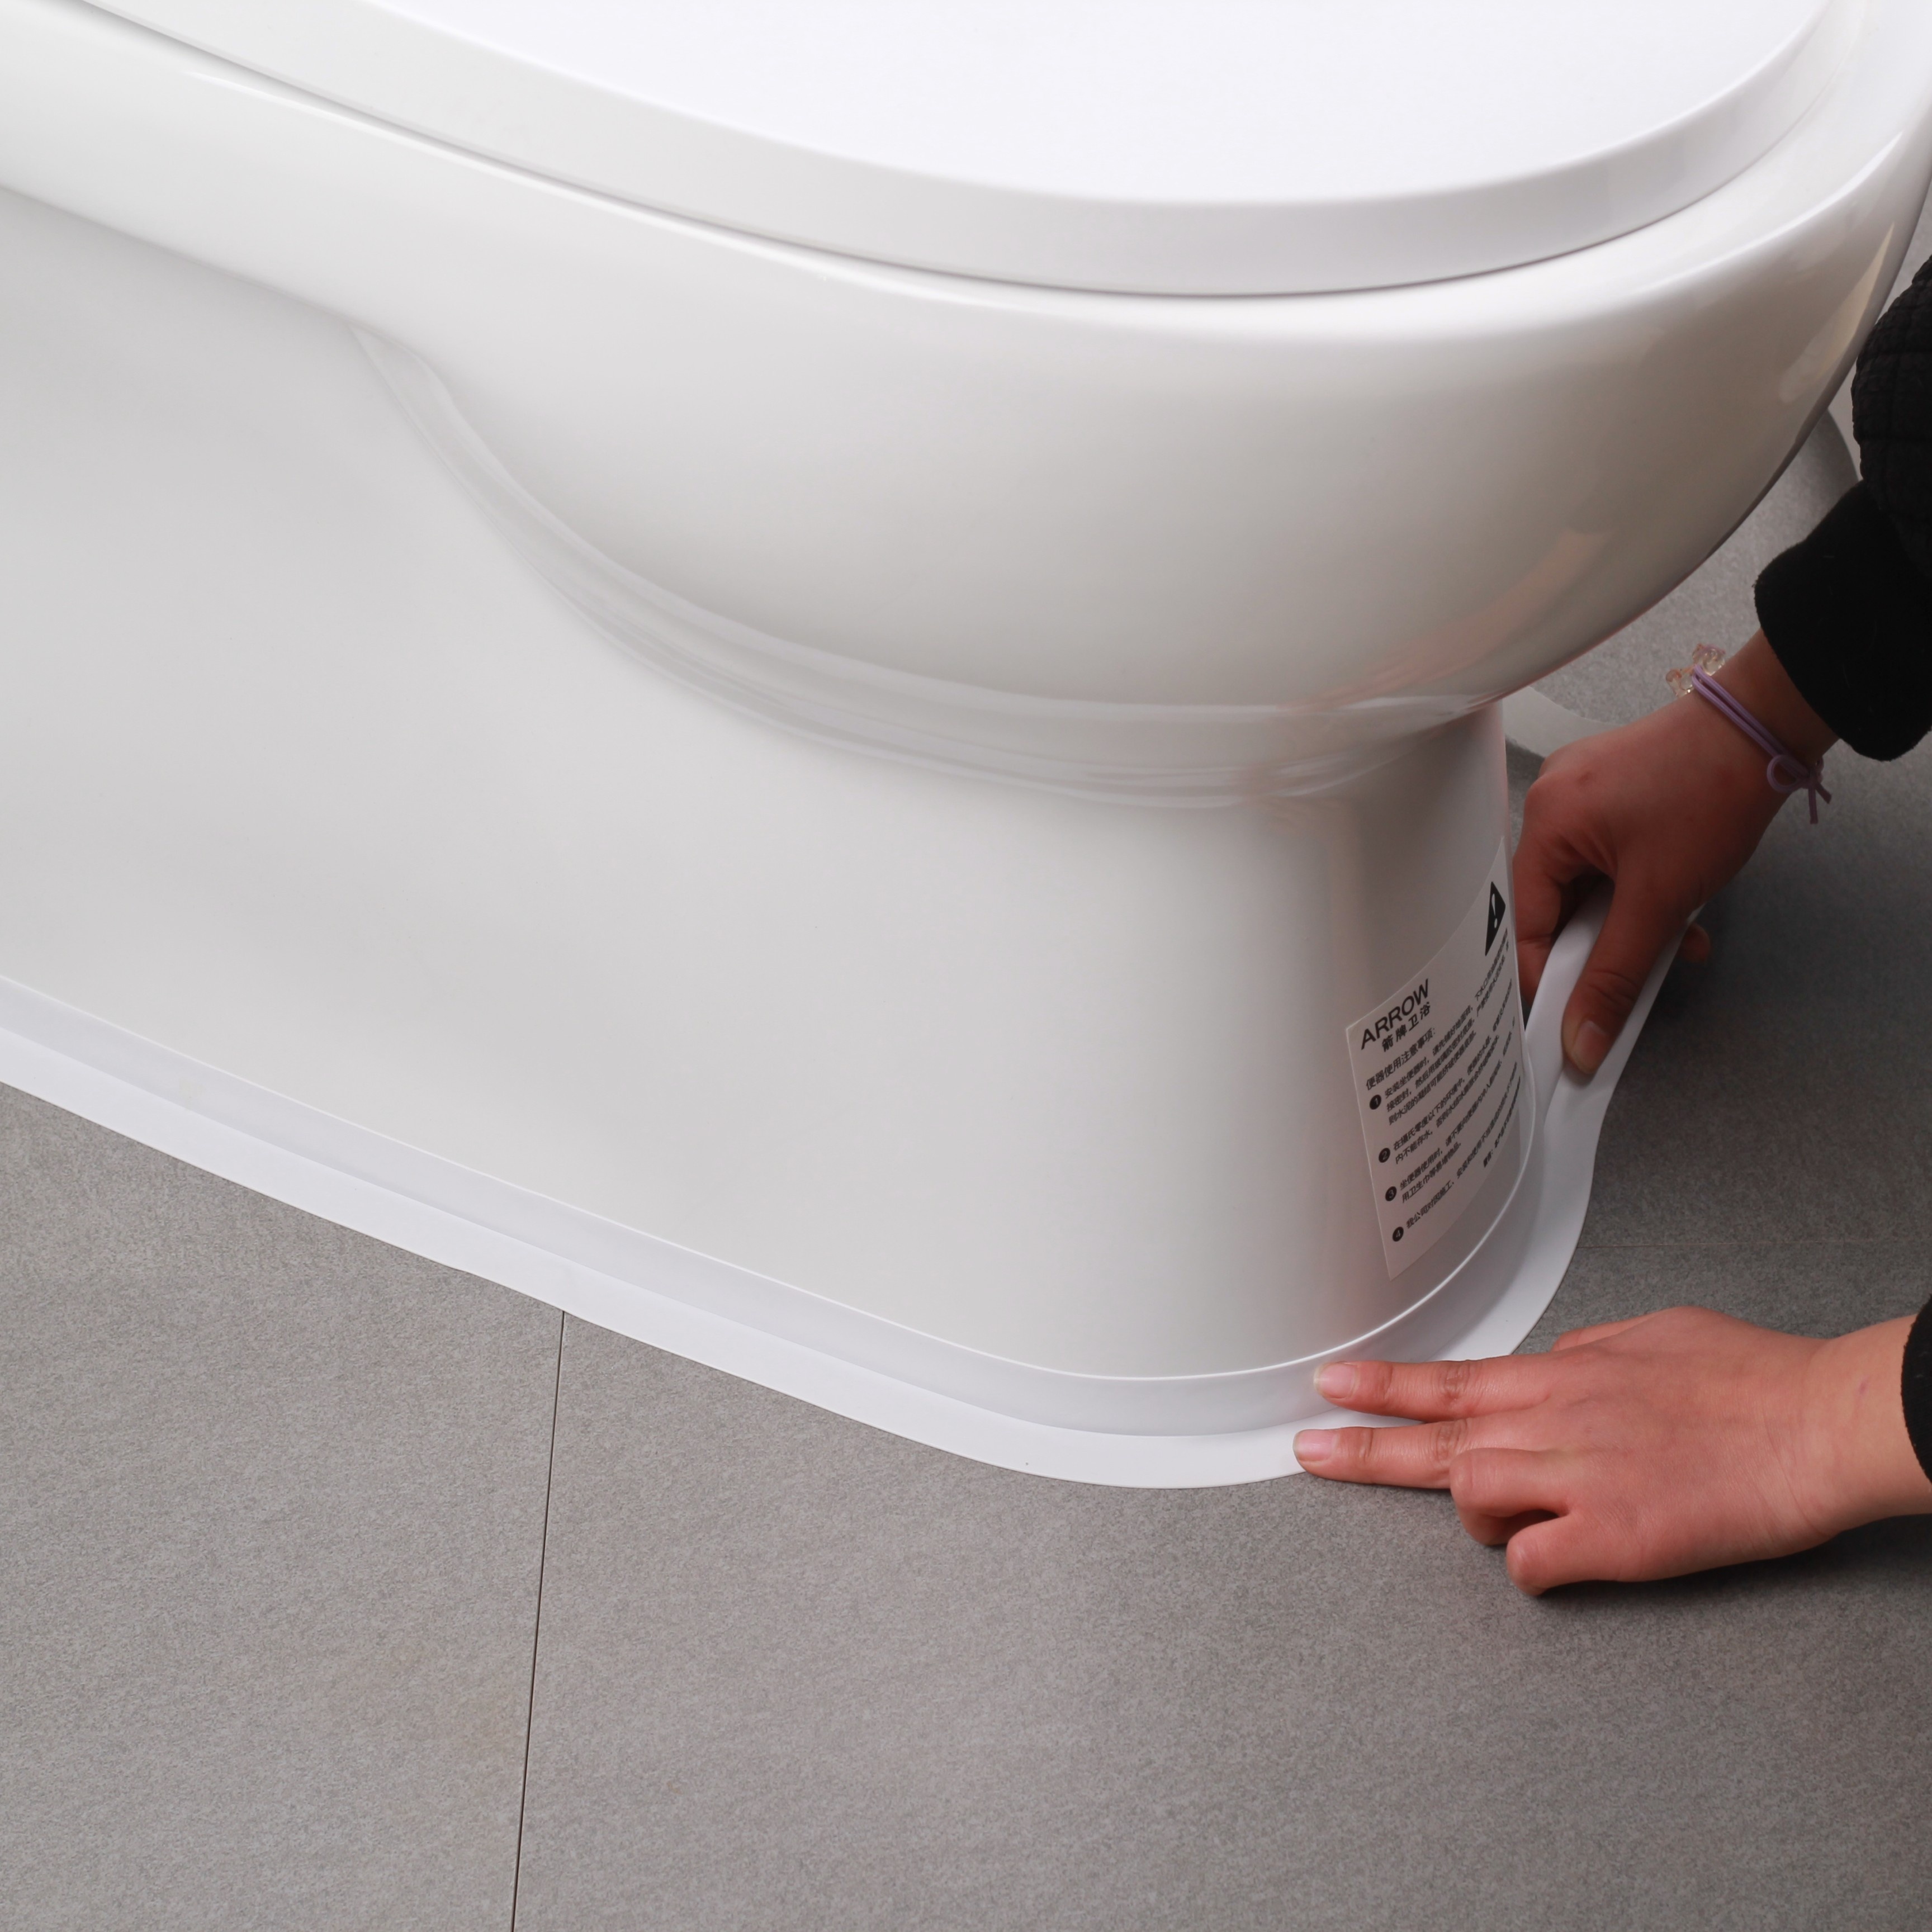 1m Flexible Double-opening Bathroom Waterproof Strip, Self-adhesive Mildew  Resistant Shower Room Ground Water Barrier, With 360-degree Rotation  Suitable For Wet And Dry Separation In Toilets, Bathrooms And Shower Rooms